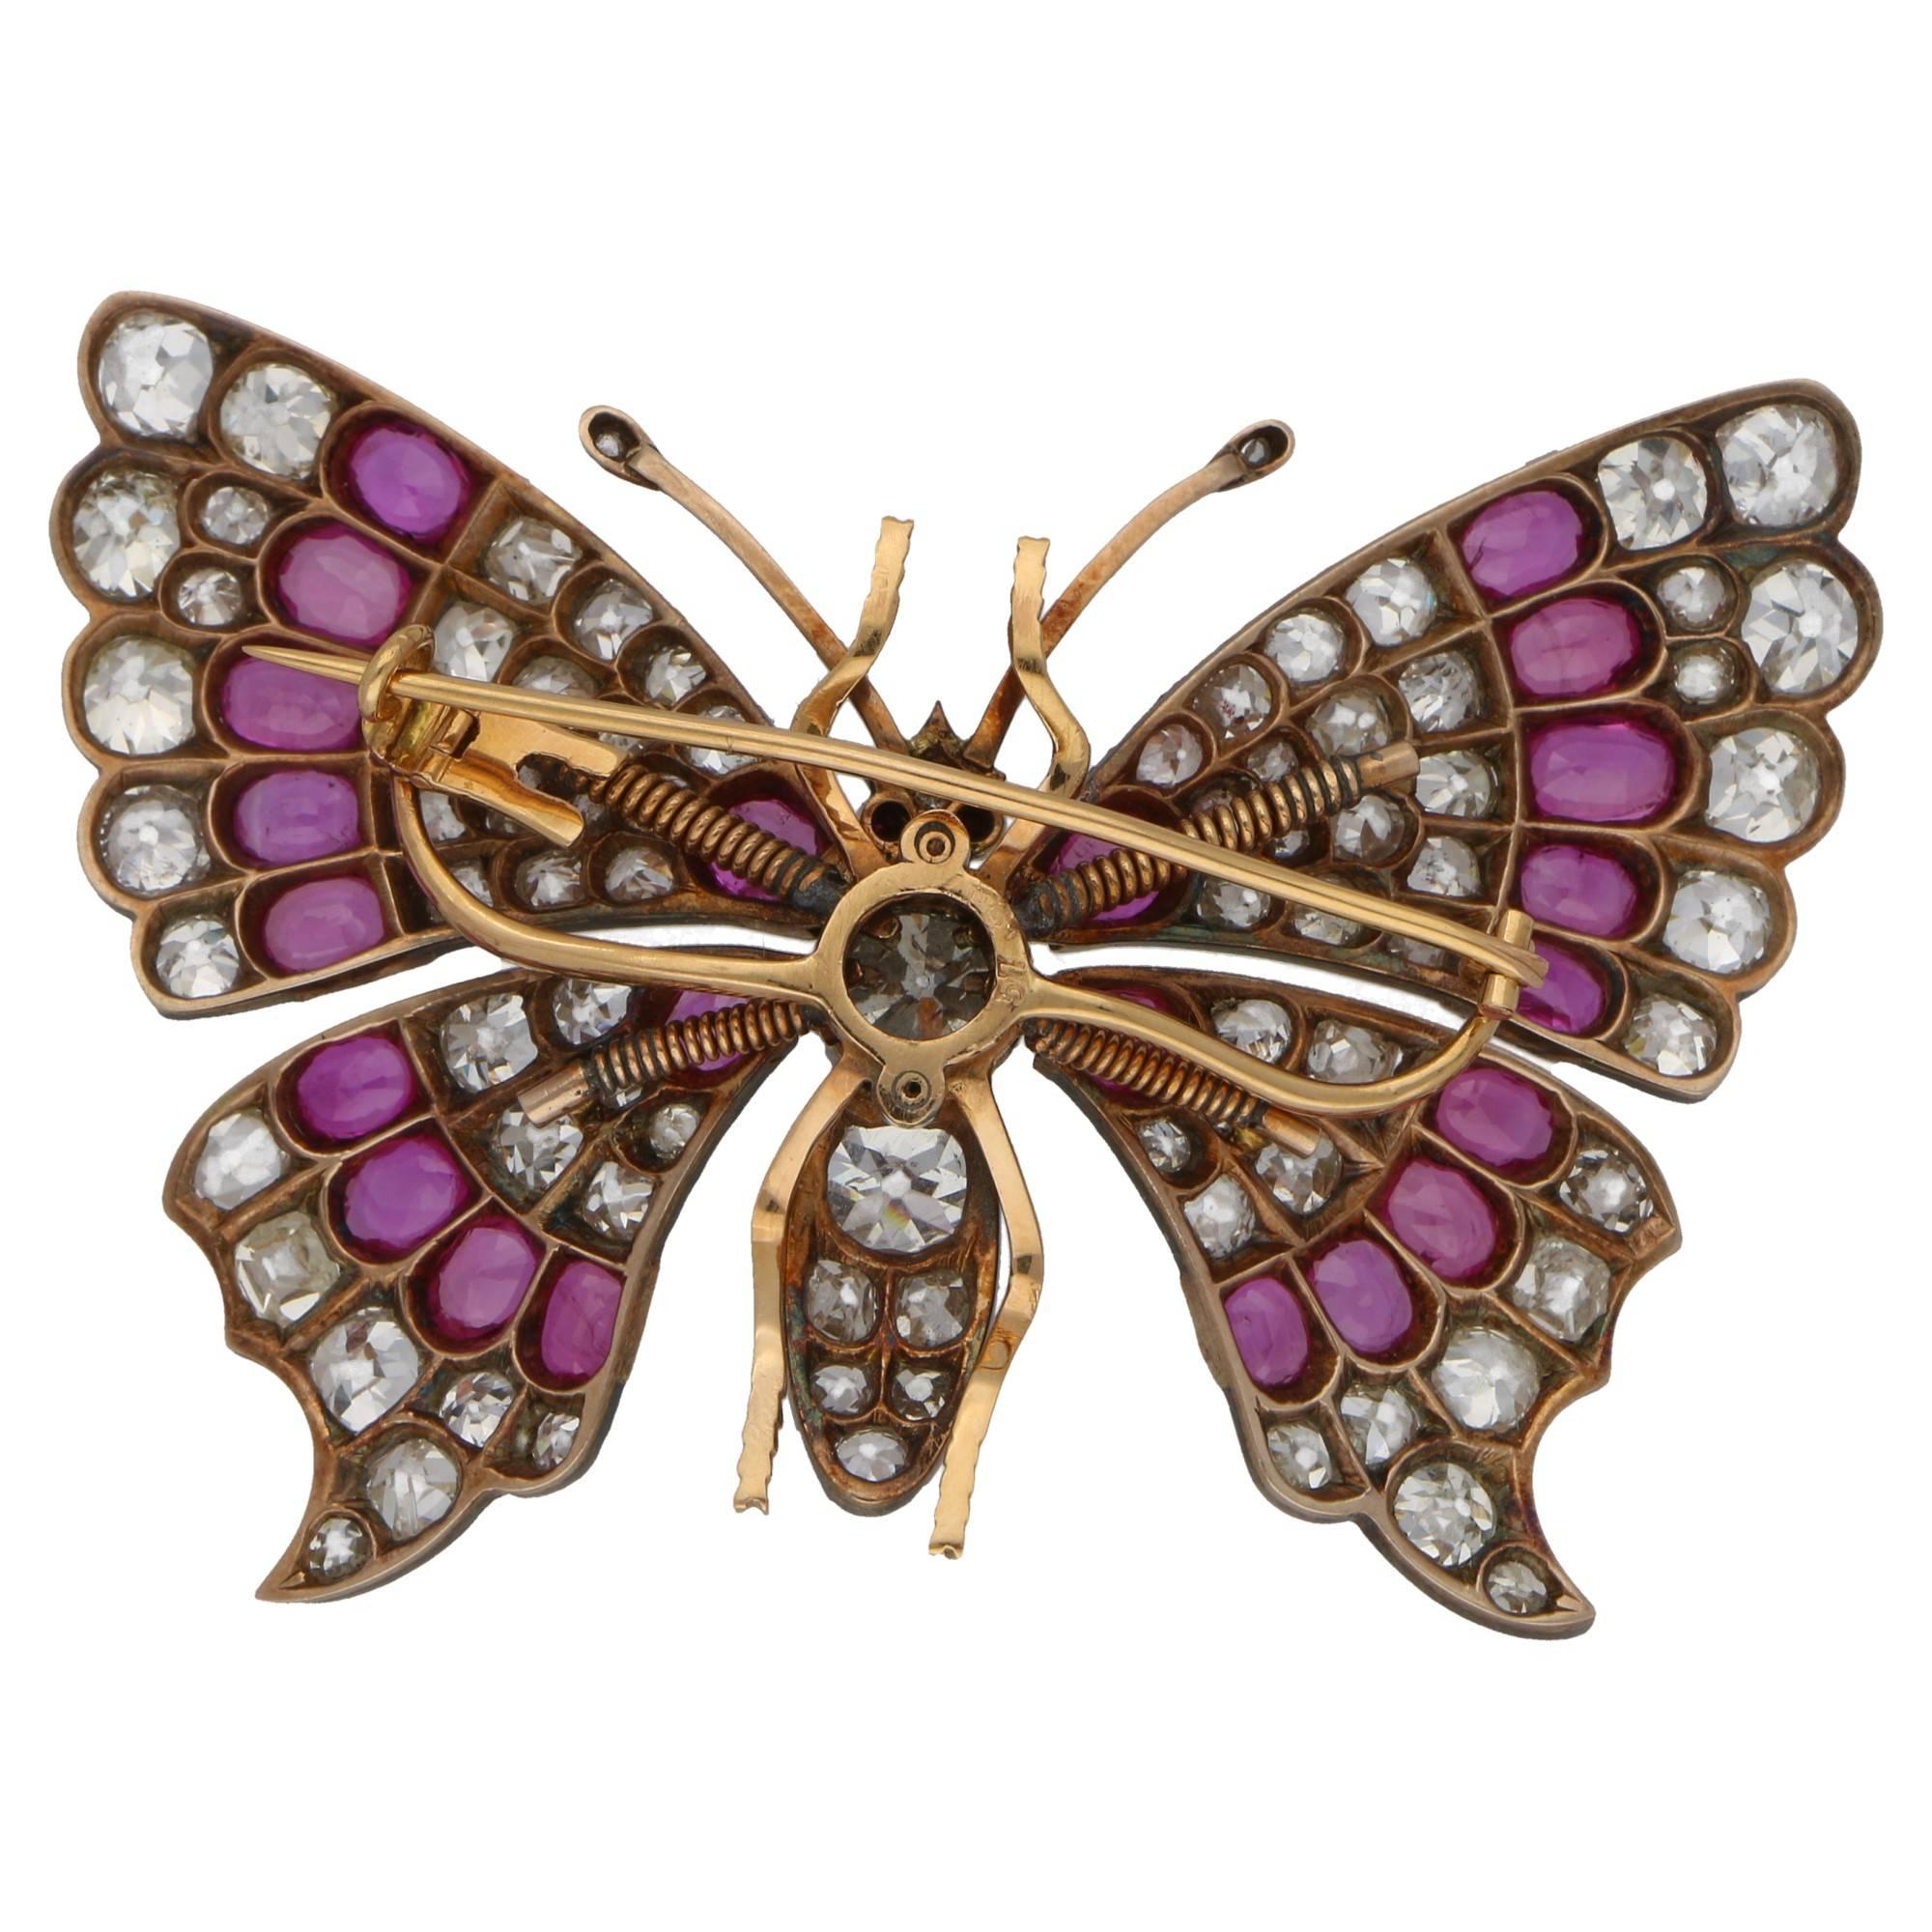 A stunning butterfly brooch set in 18ct rose gold and silver, featuring sprung set fluttering wings grain set with diamonds and rubies. The body of the butterfly is grain set with diamonds, featuring one large 1.44ct Old European cut diamond in the